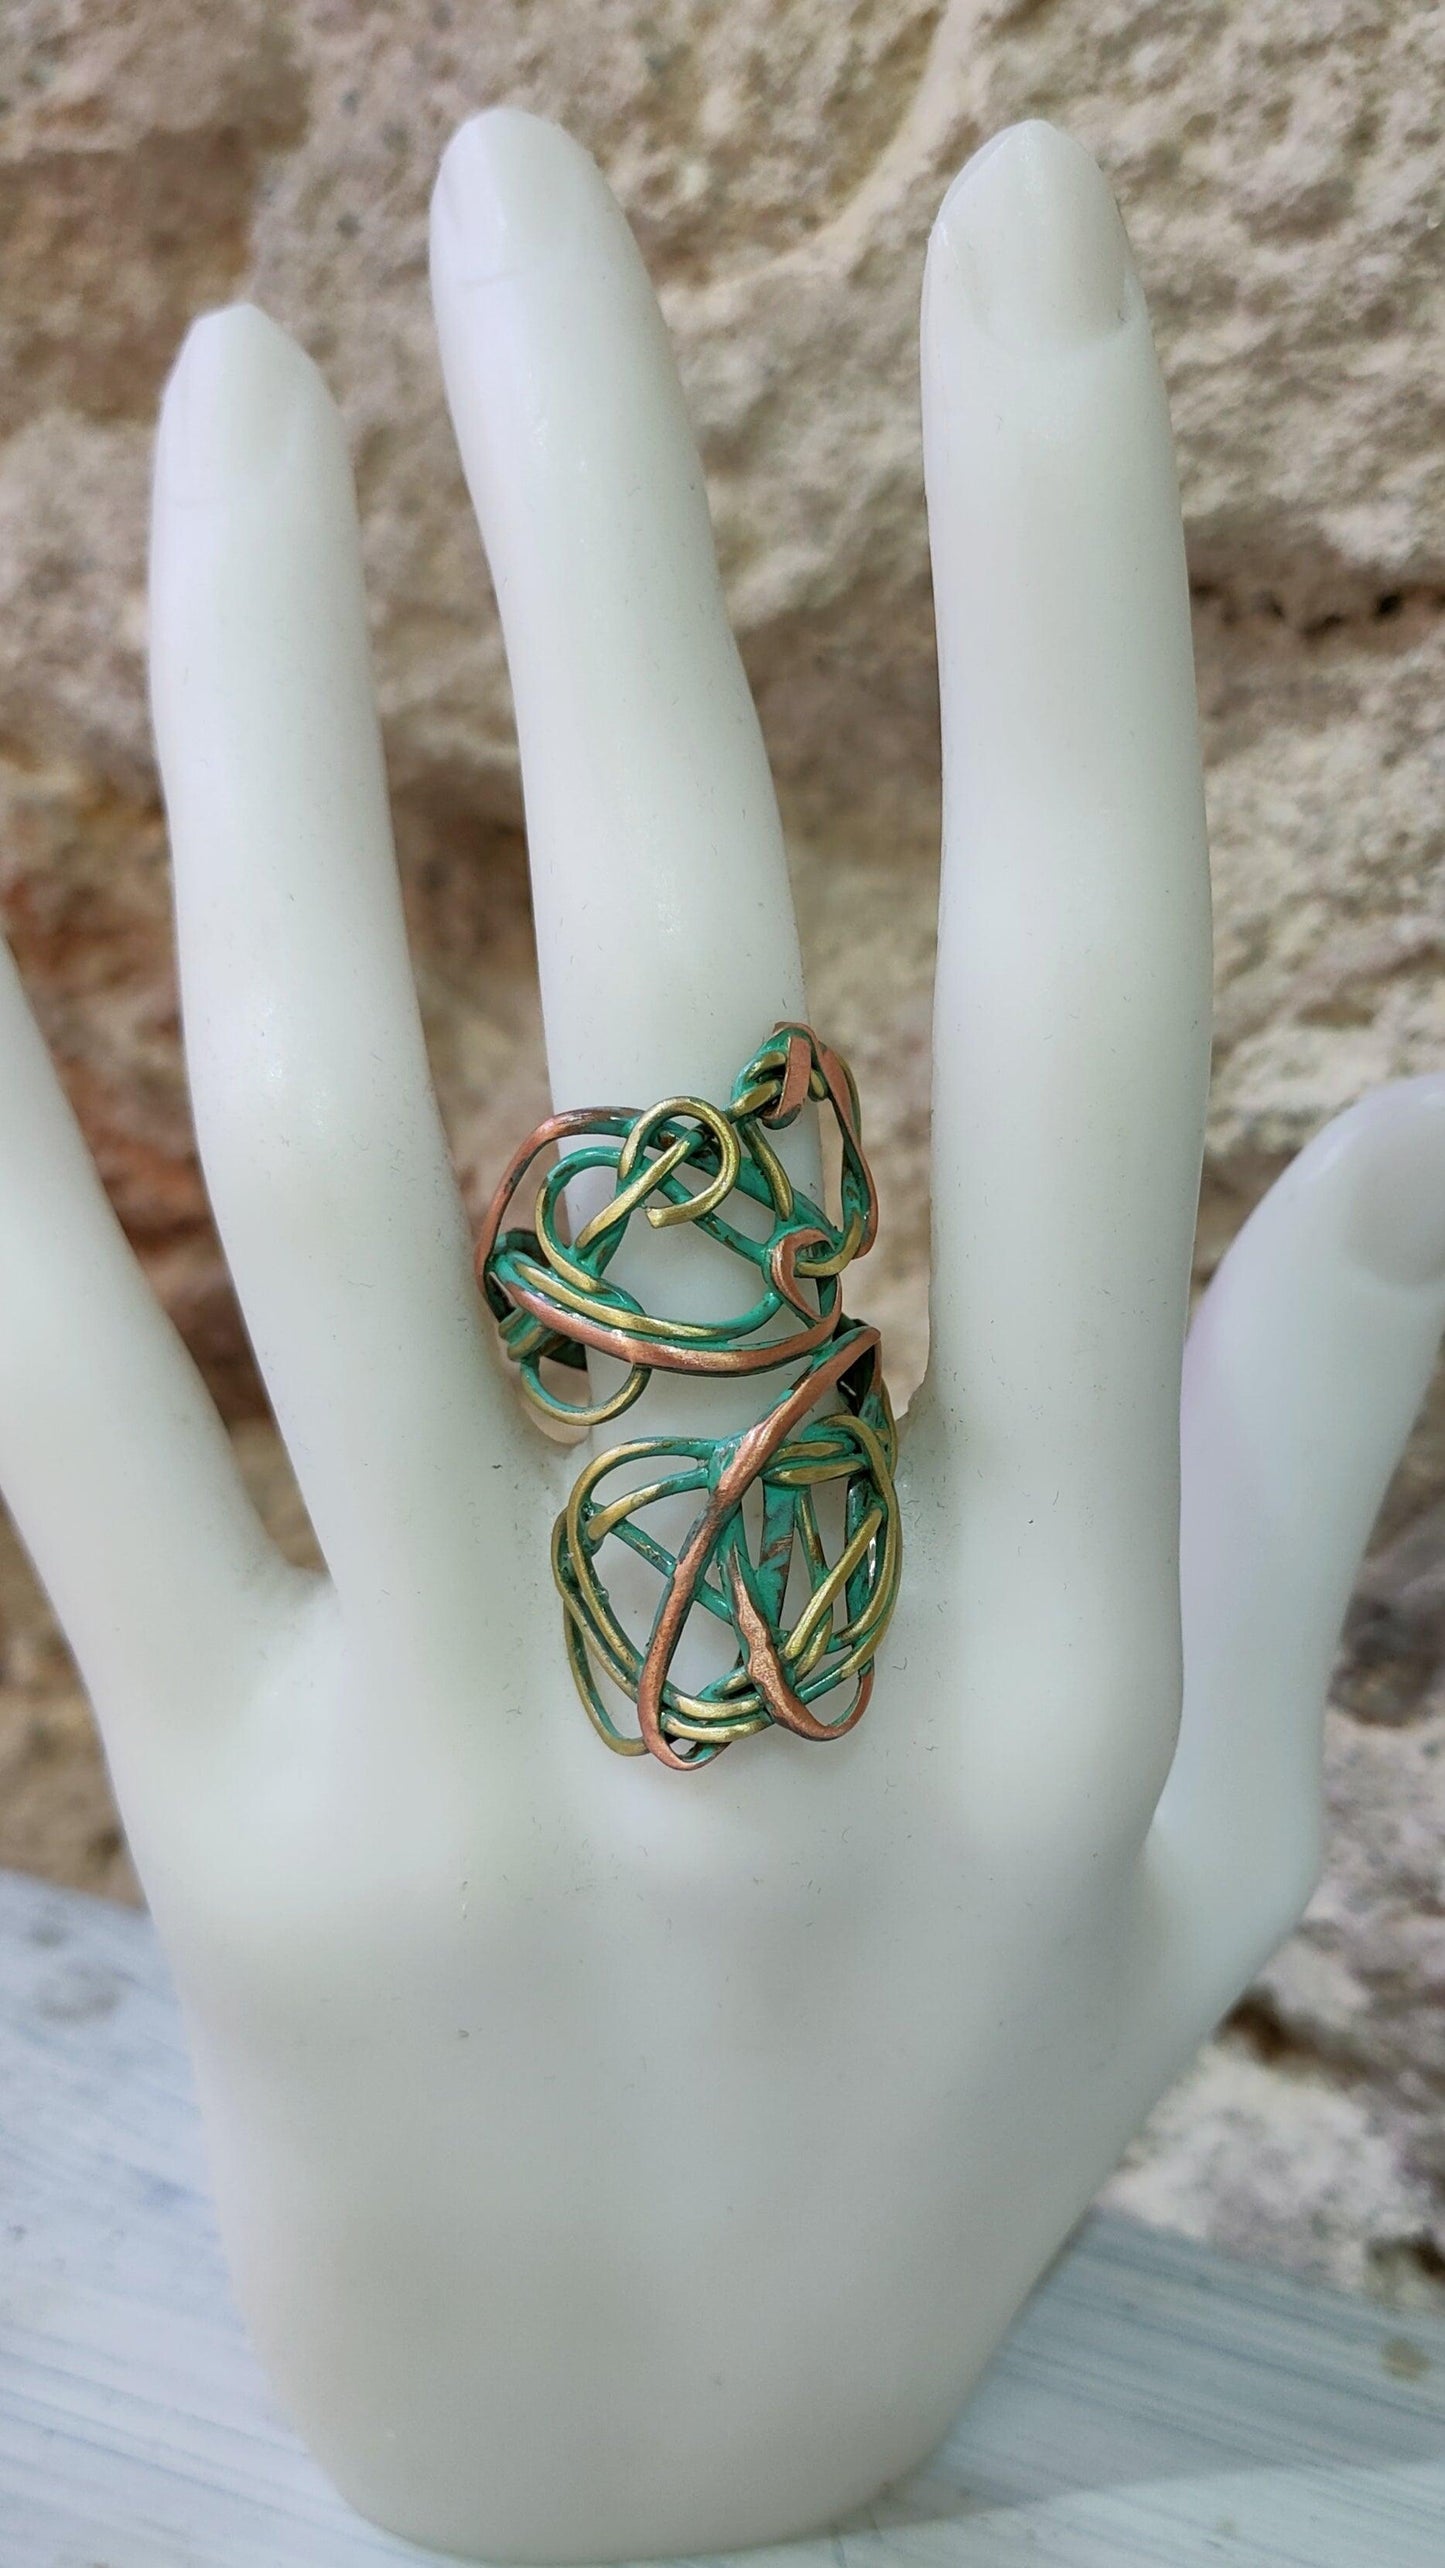 Statement ring with green patina